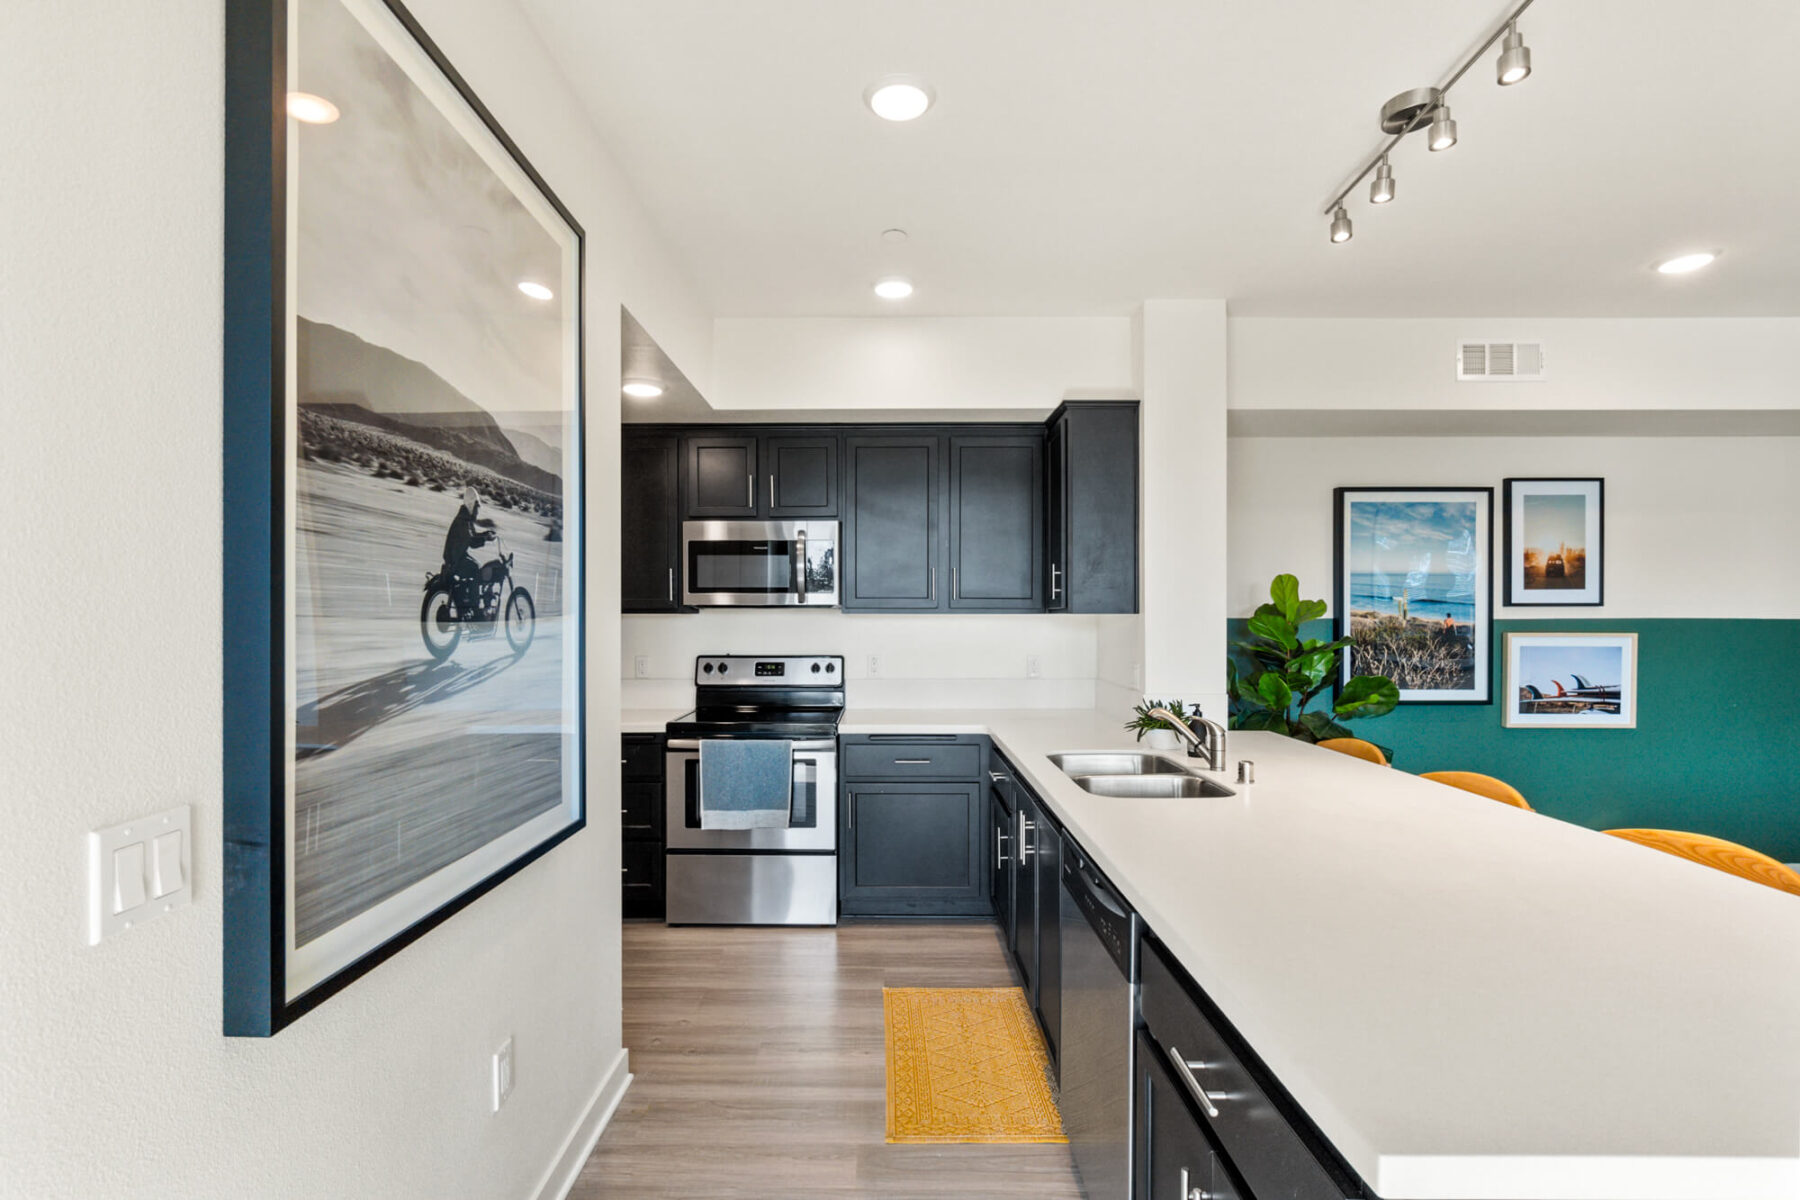 Kitchen with white counters, black cabinets, and stainless steel appliances